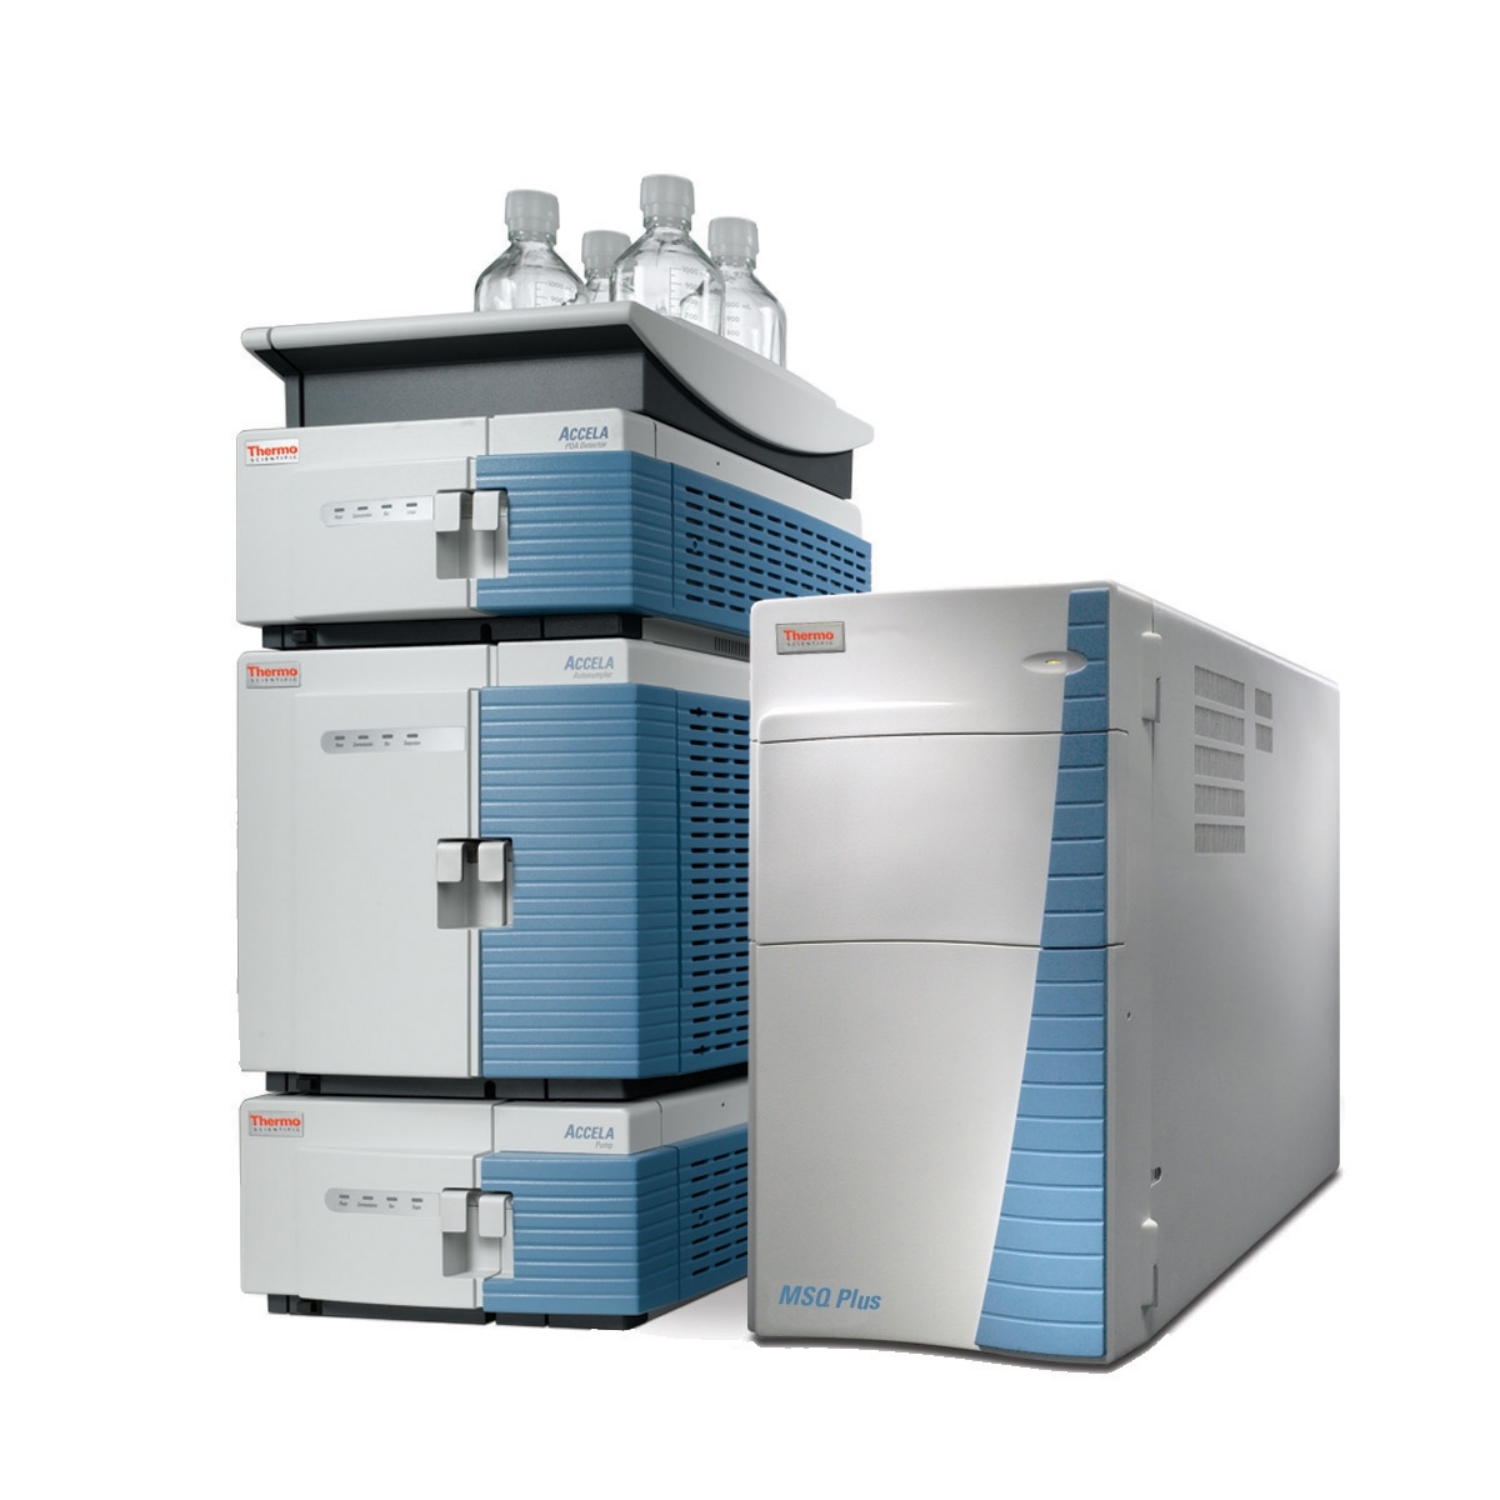 Thermo Fisher Scientific UHPLC Enables Enhanced Resolution Separations of Complex Drug Mixtures